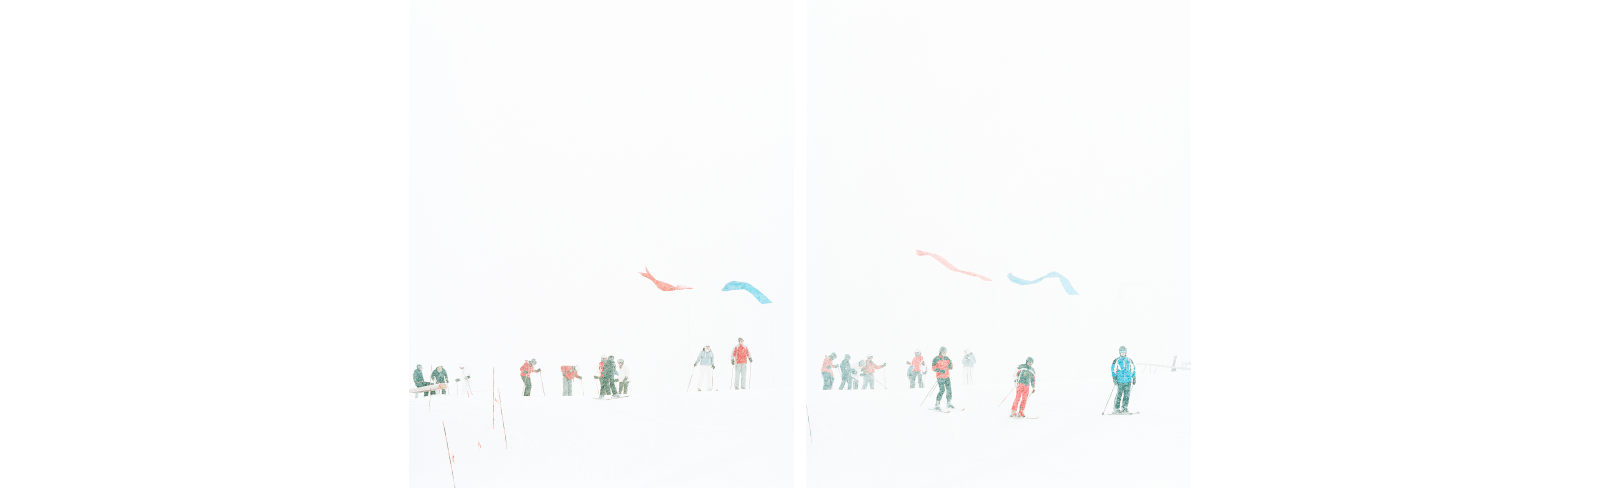 a group of people on skis